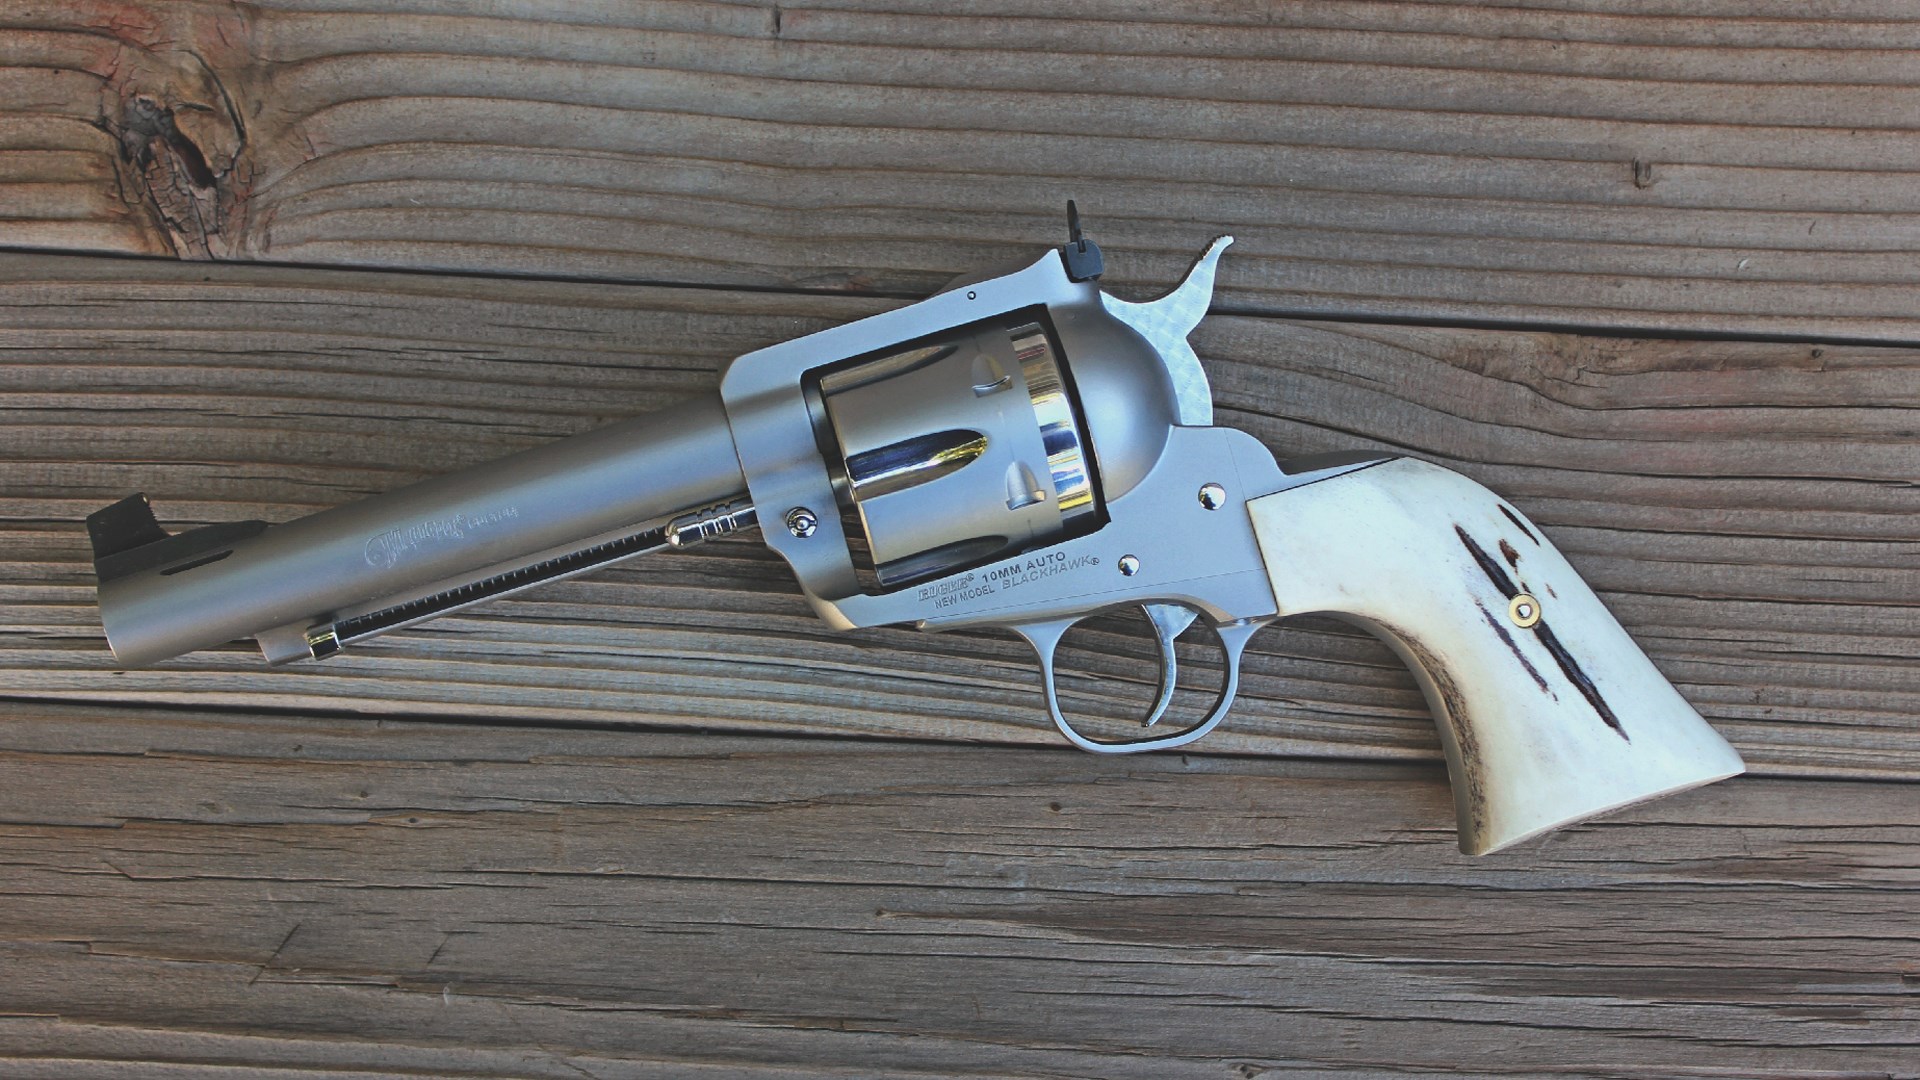 This revolver’s internal components were given an ‘action job’ to smooth operations and lighten the trigger pull.